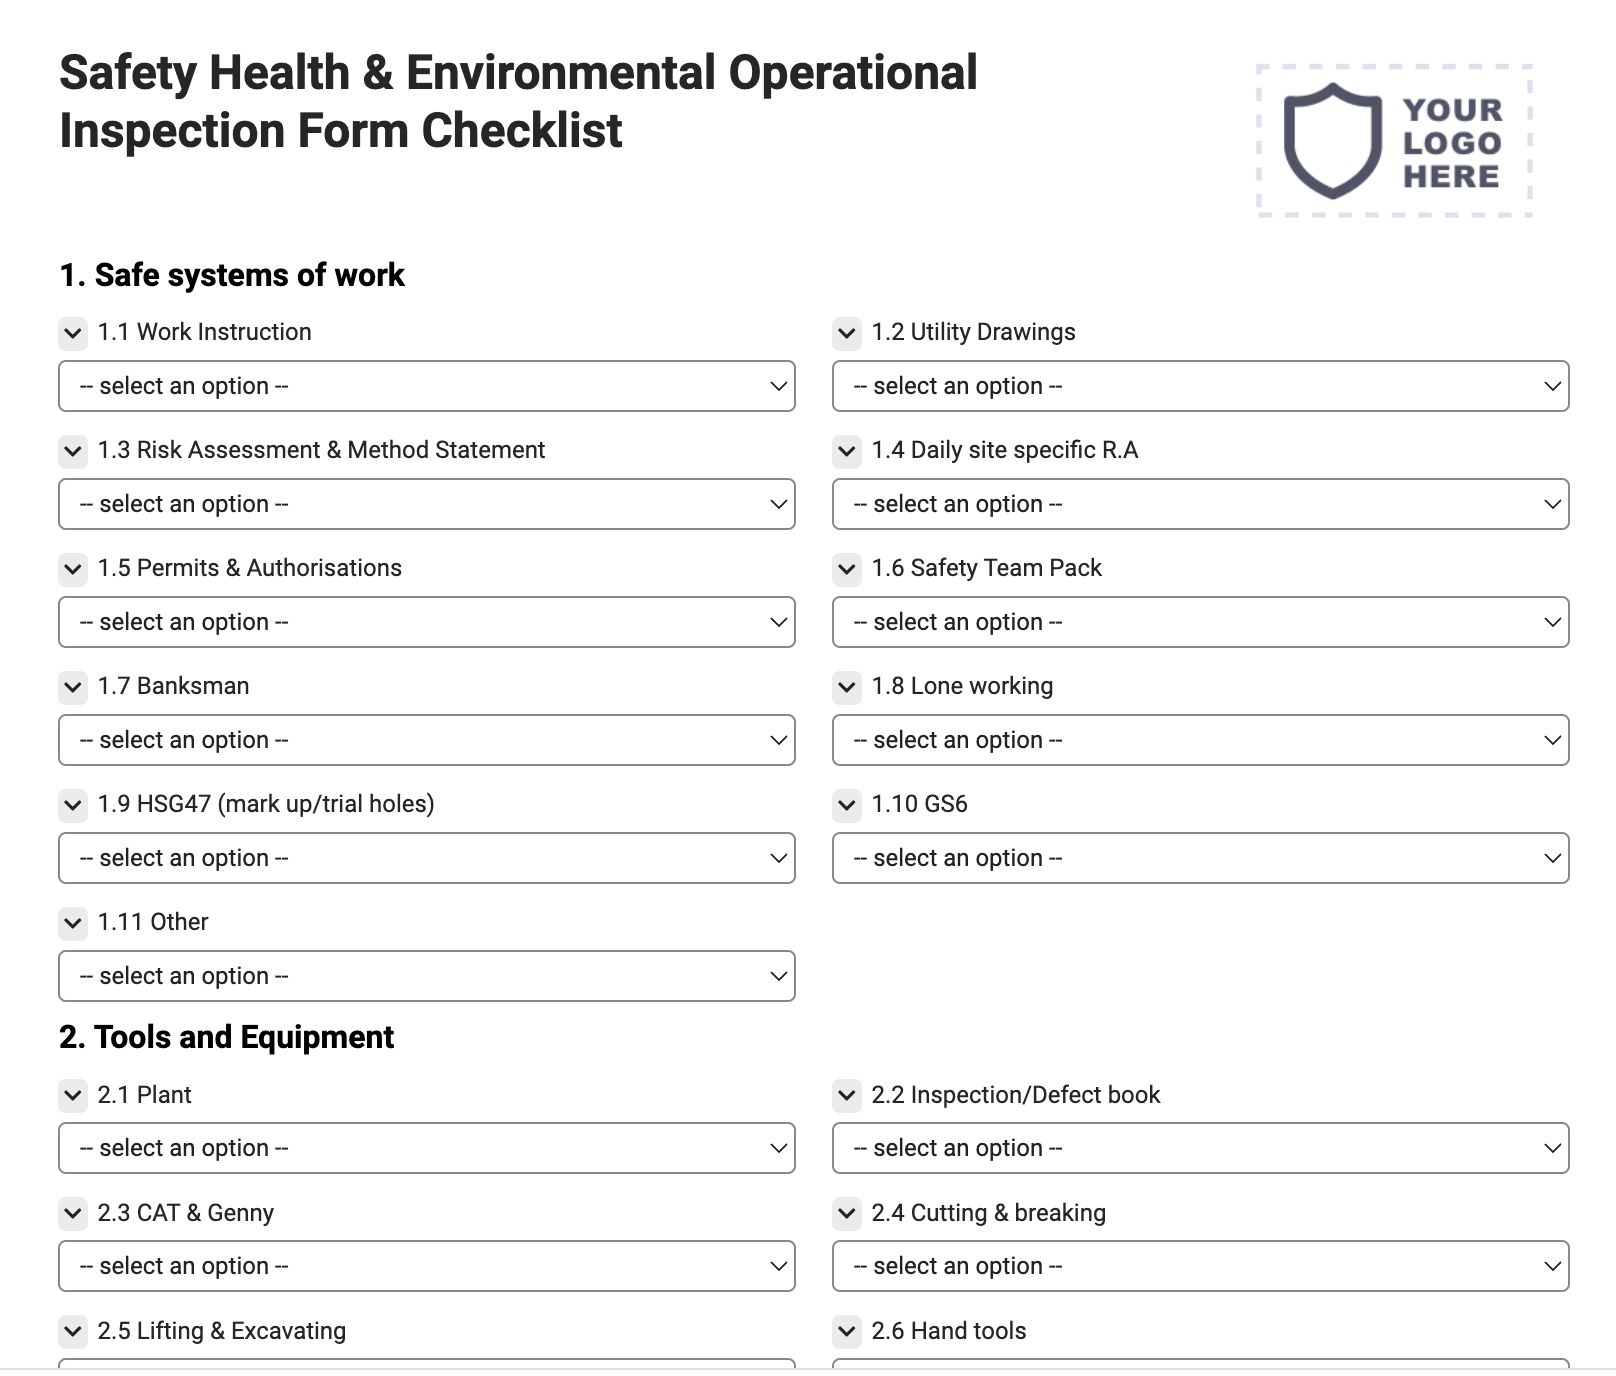 Safety Health & Environmental Operational Inspection Form Checklist